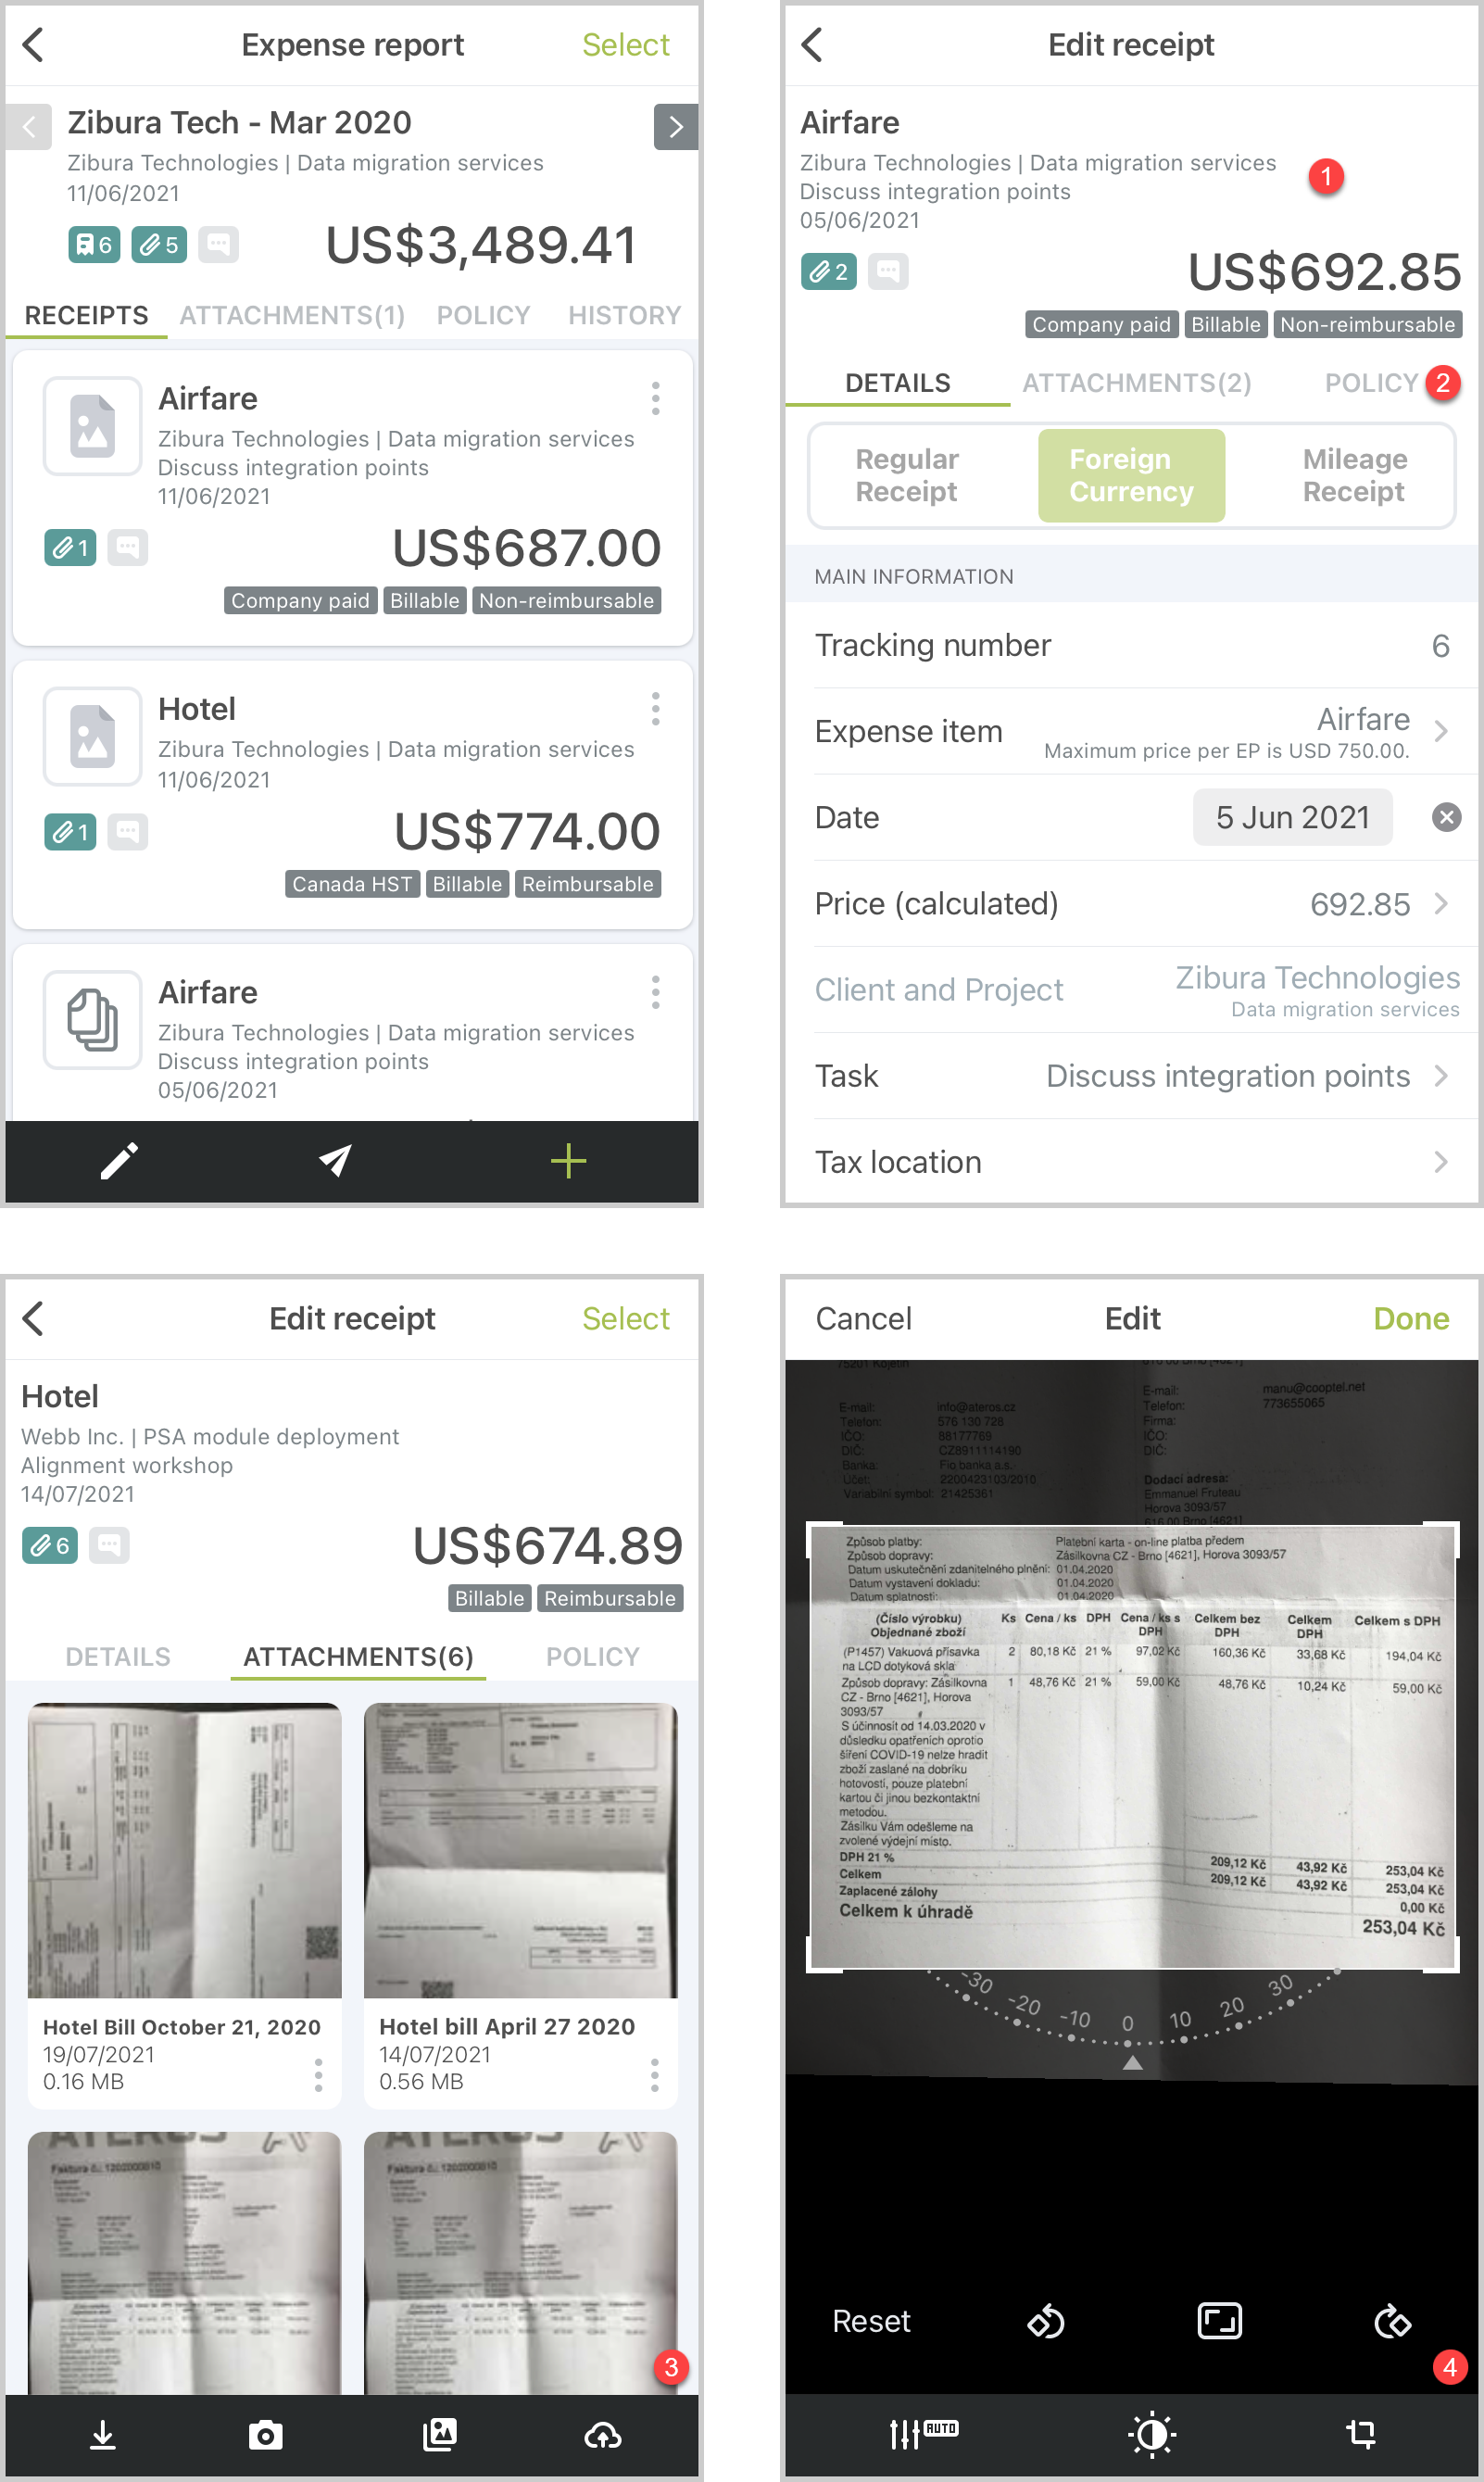 Expense report screen, Receipt screen, Attachments tab and image editing screens in OpenAir Mobile.